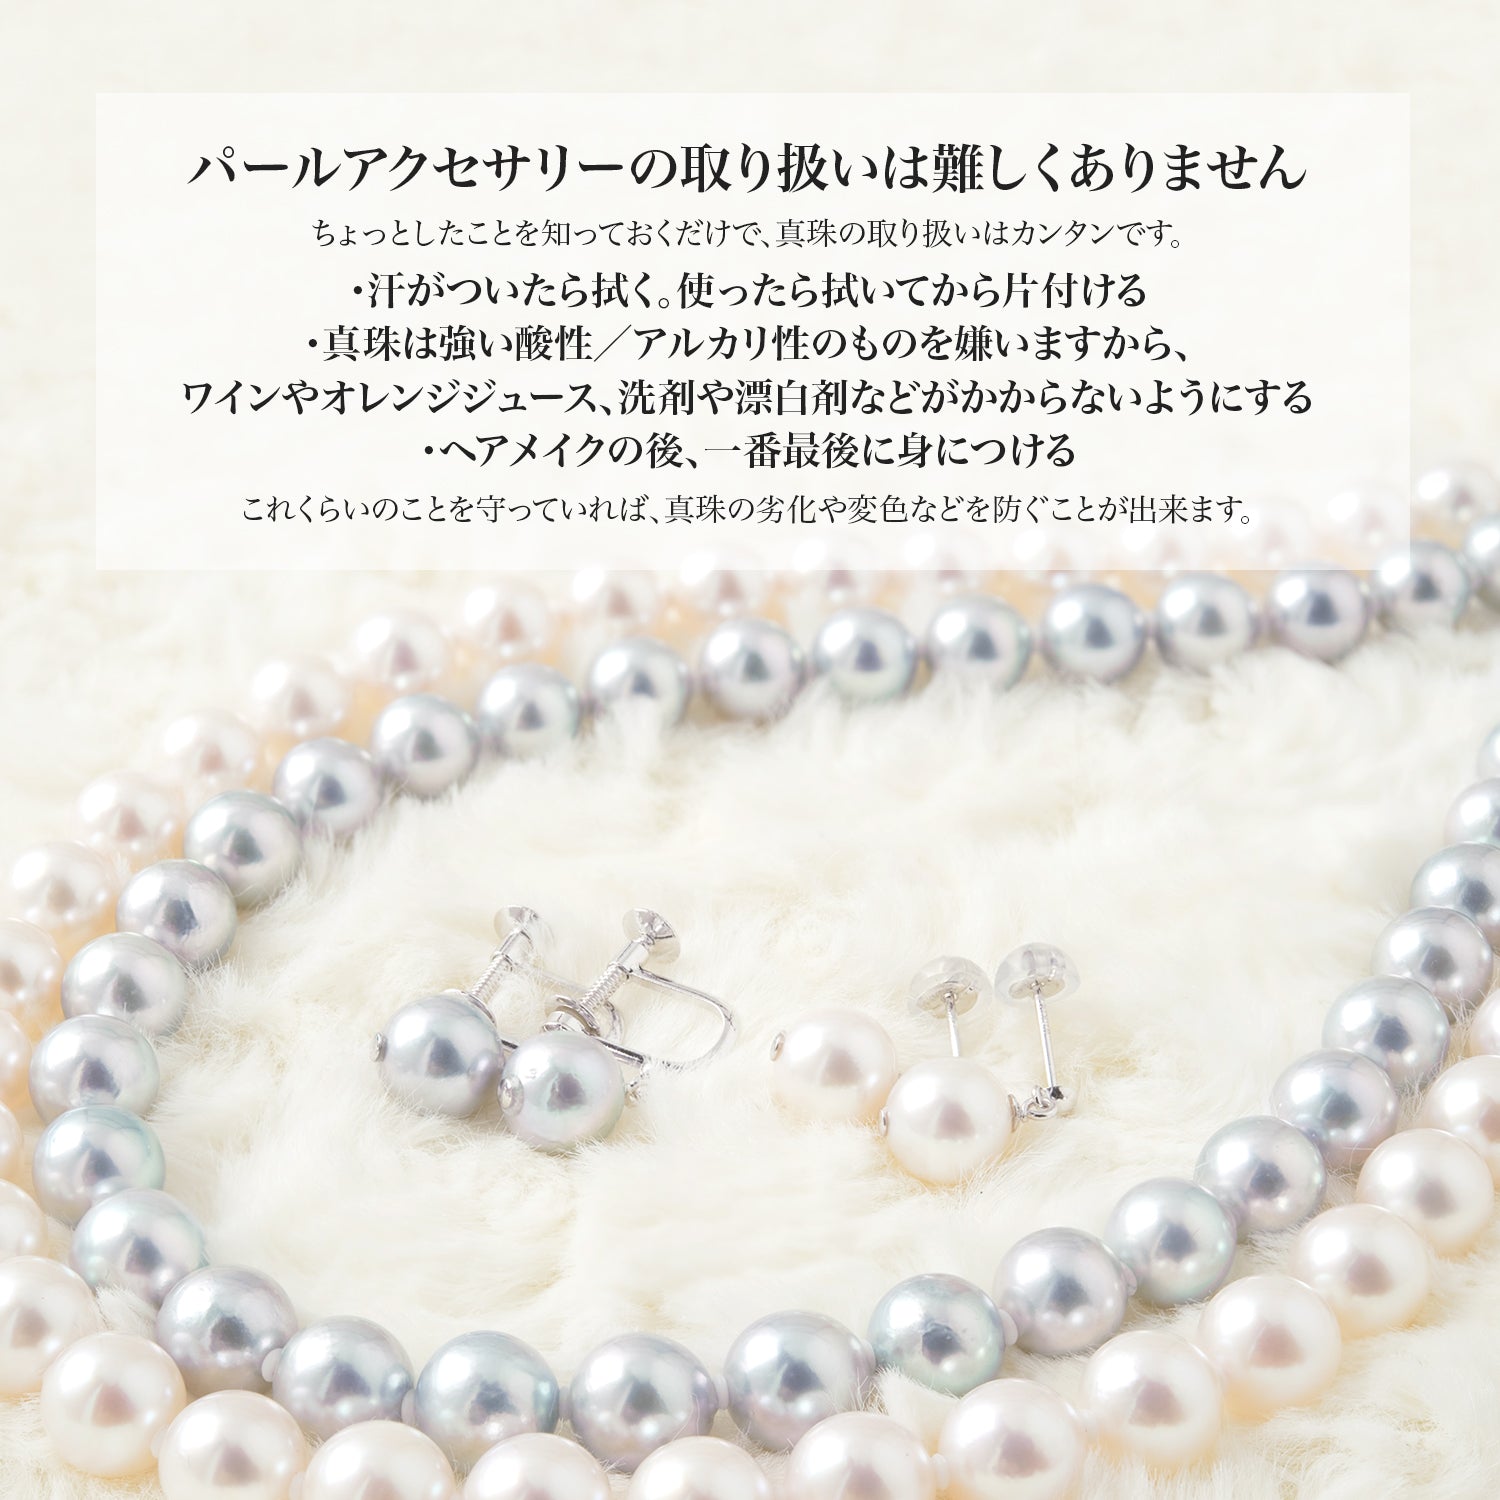 Pearl brooch simple SV925 white 7.5-8.0mm Akoya pearl with storage case (3929)